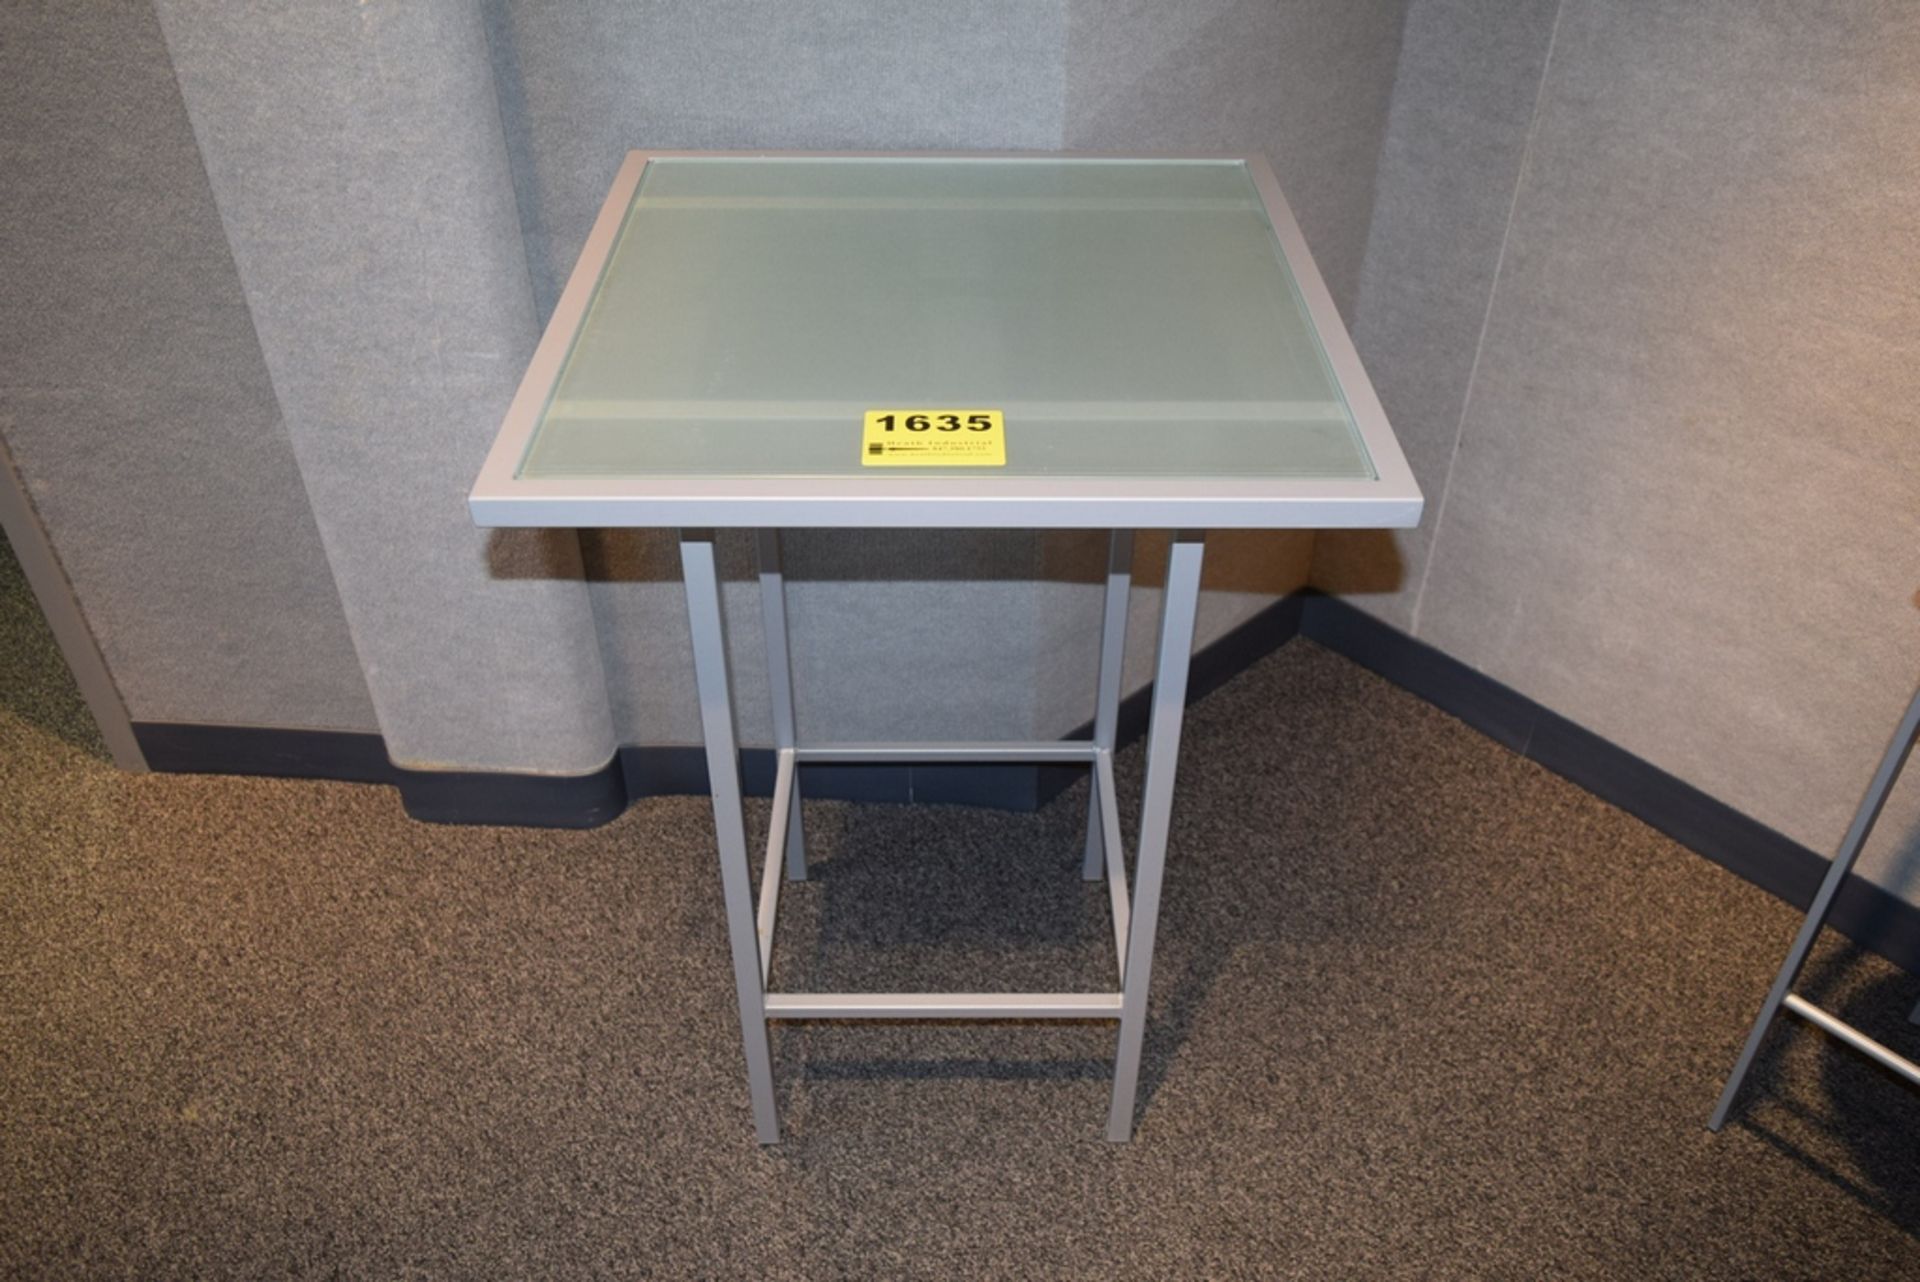 16"X16"X38" METAL FRAME GLASS TOP TABLE, NO CHAIRS